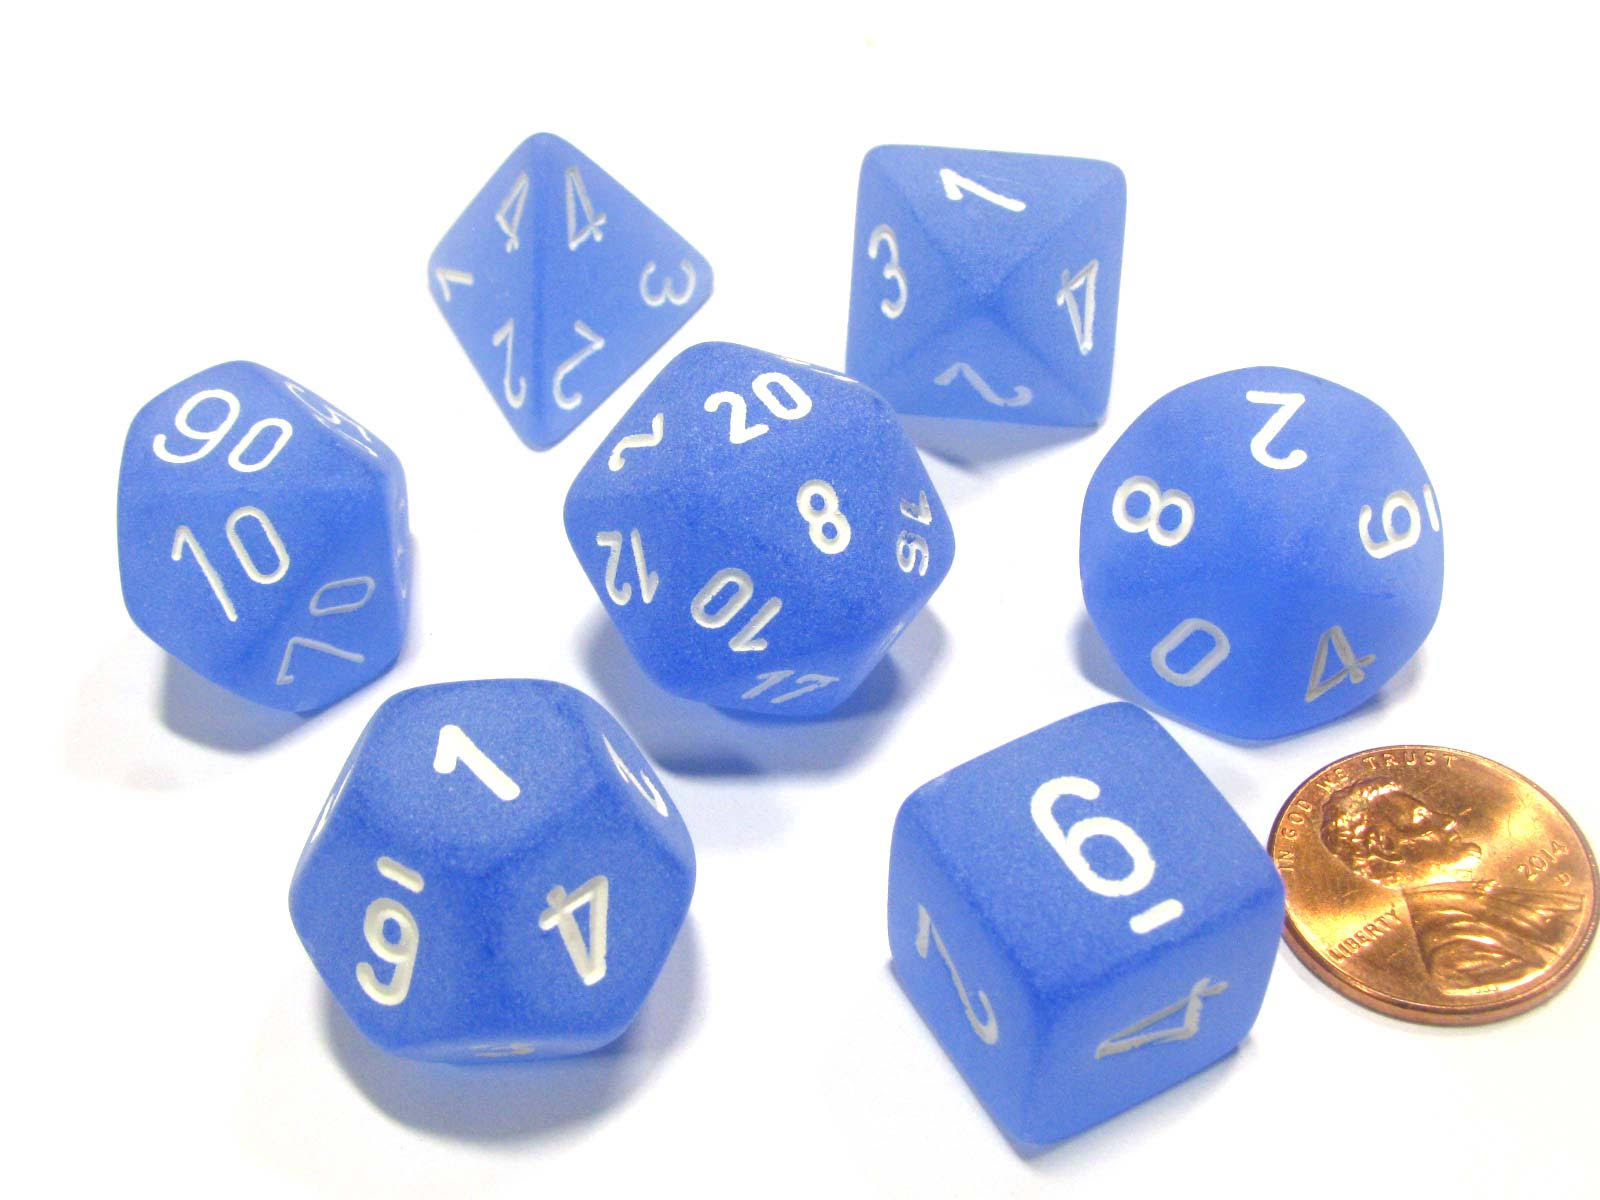 CHESSEX - Dice - 7 Die Set - FROSTED - Blue/White